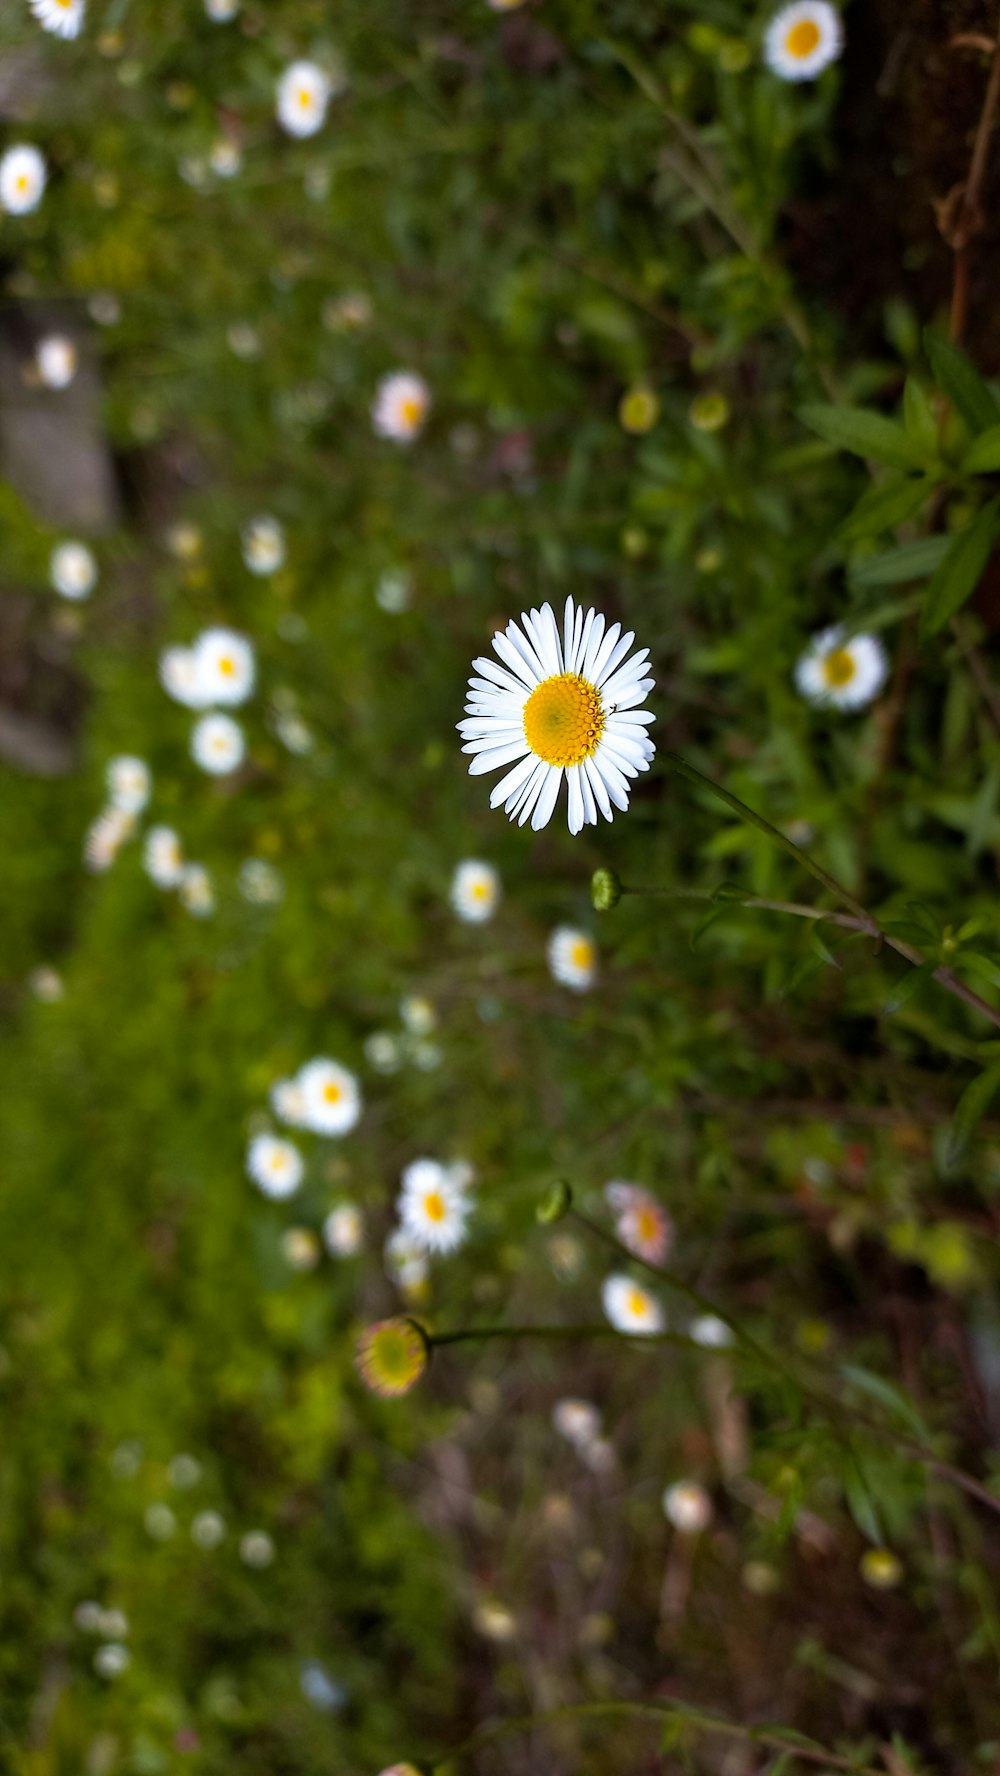 a white flower with a yellow center in a field of daisies